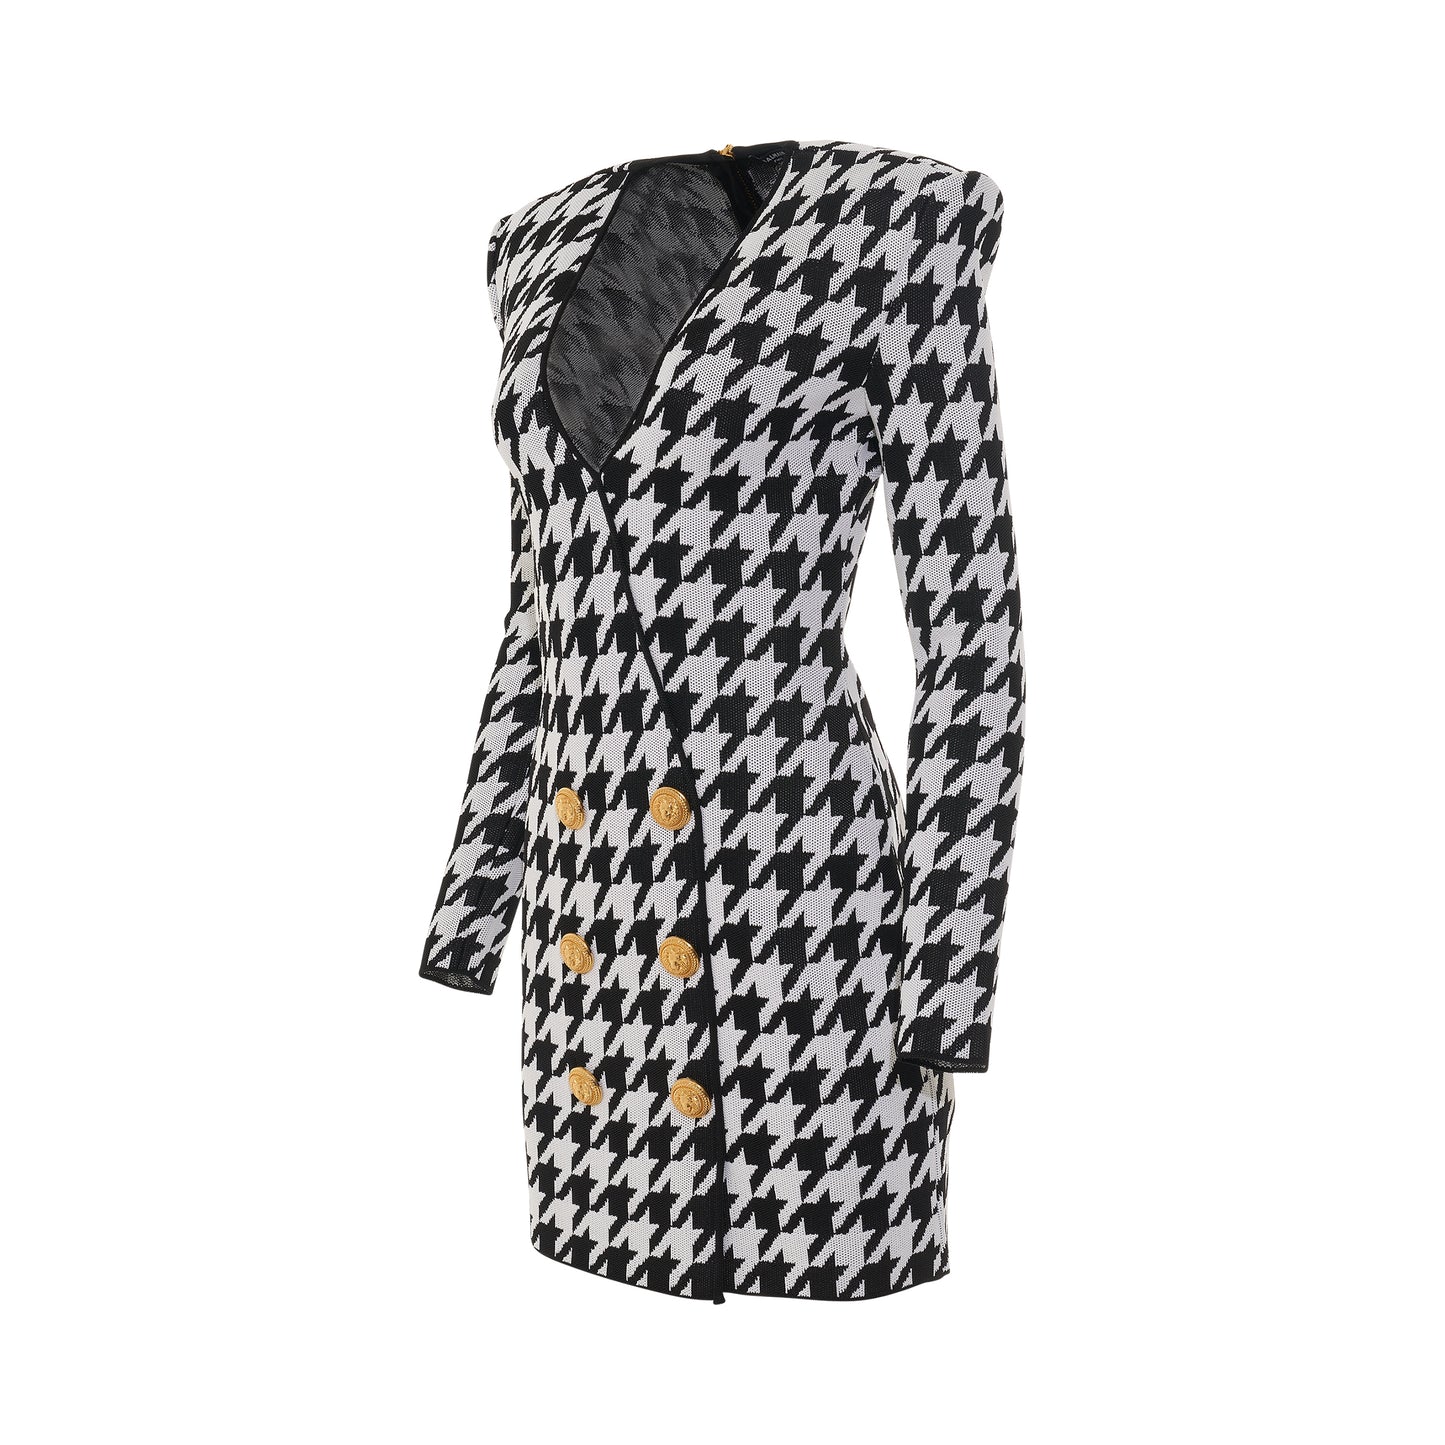 Long Sleeve 6 Button Houndstooth Wrap Knit Dress in Black/White